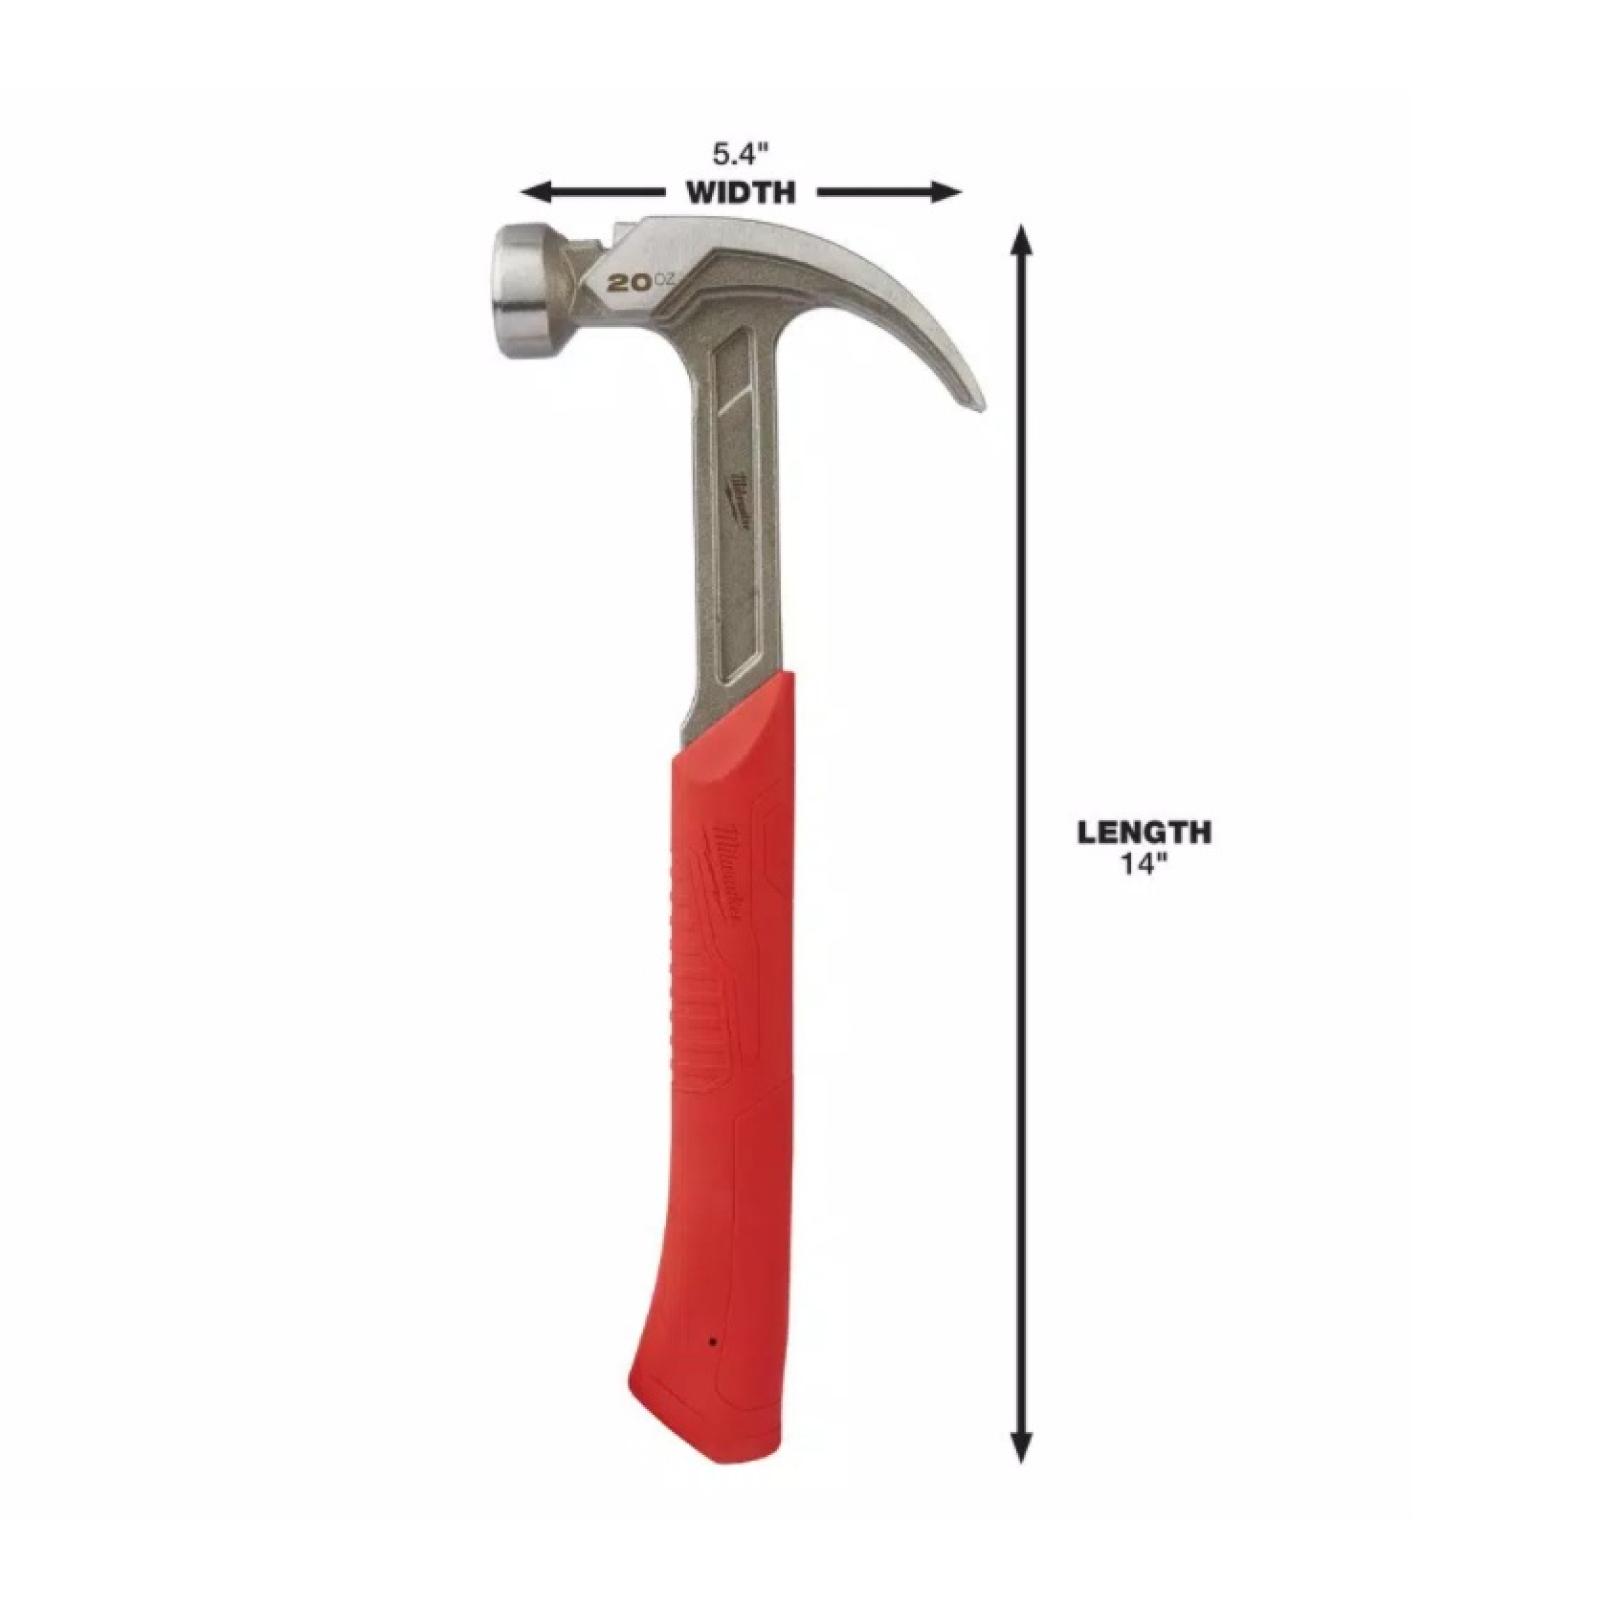 Milwaukee 20oz Curved Claw Smooth Face Hammer